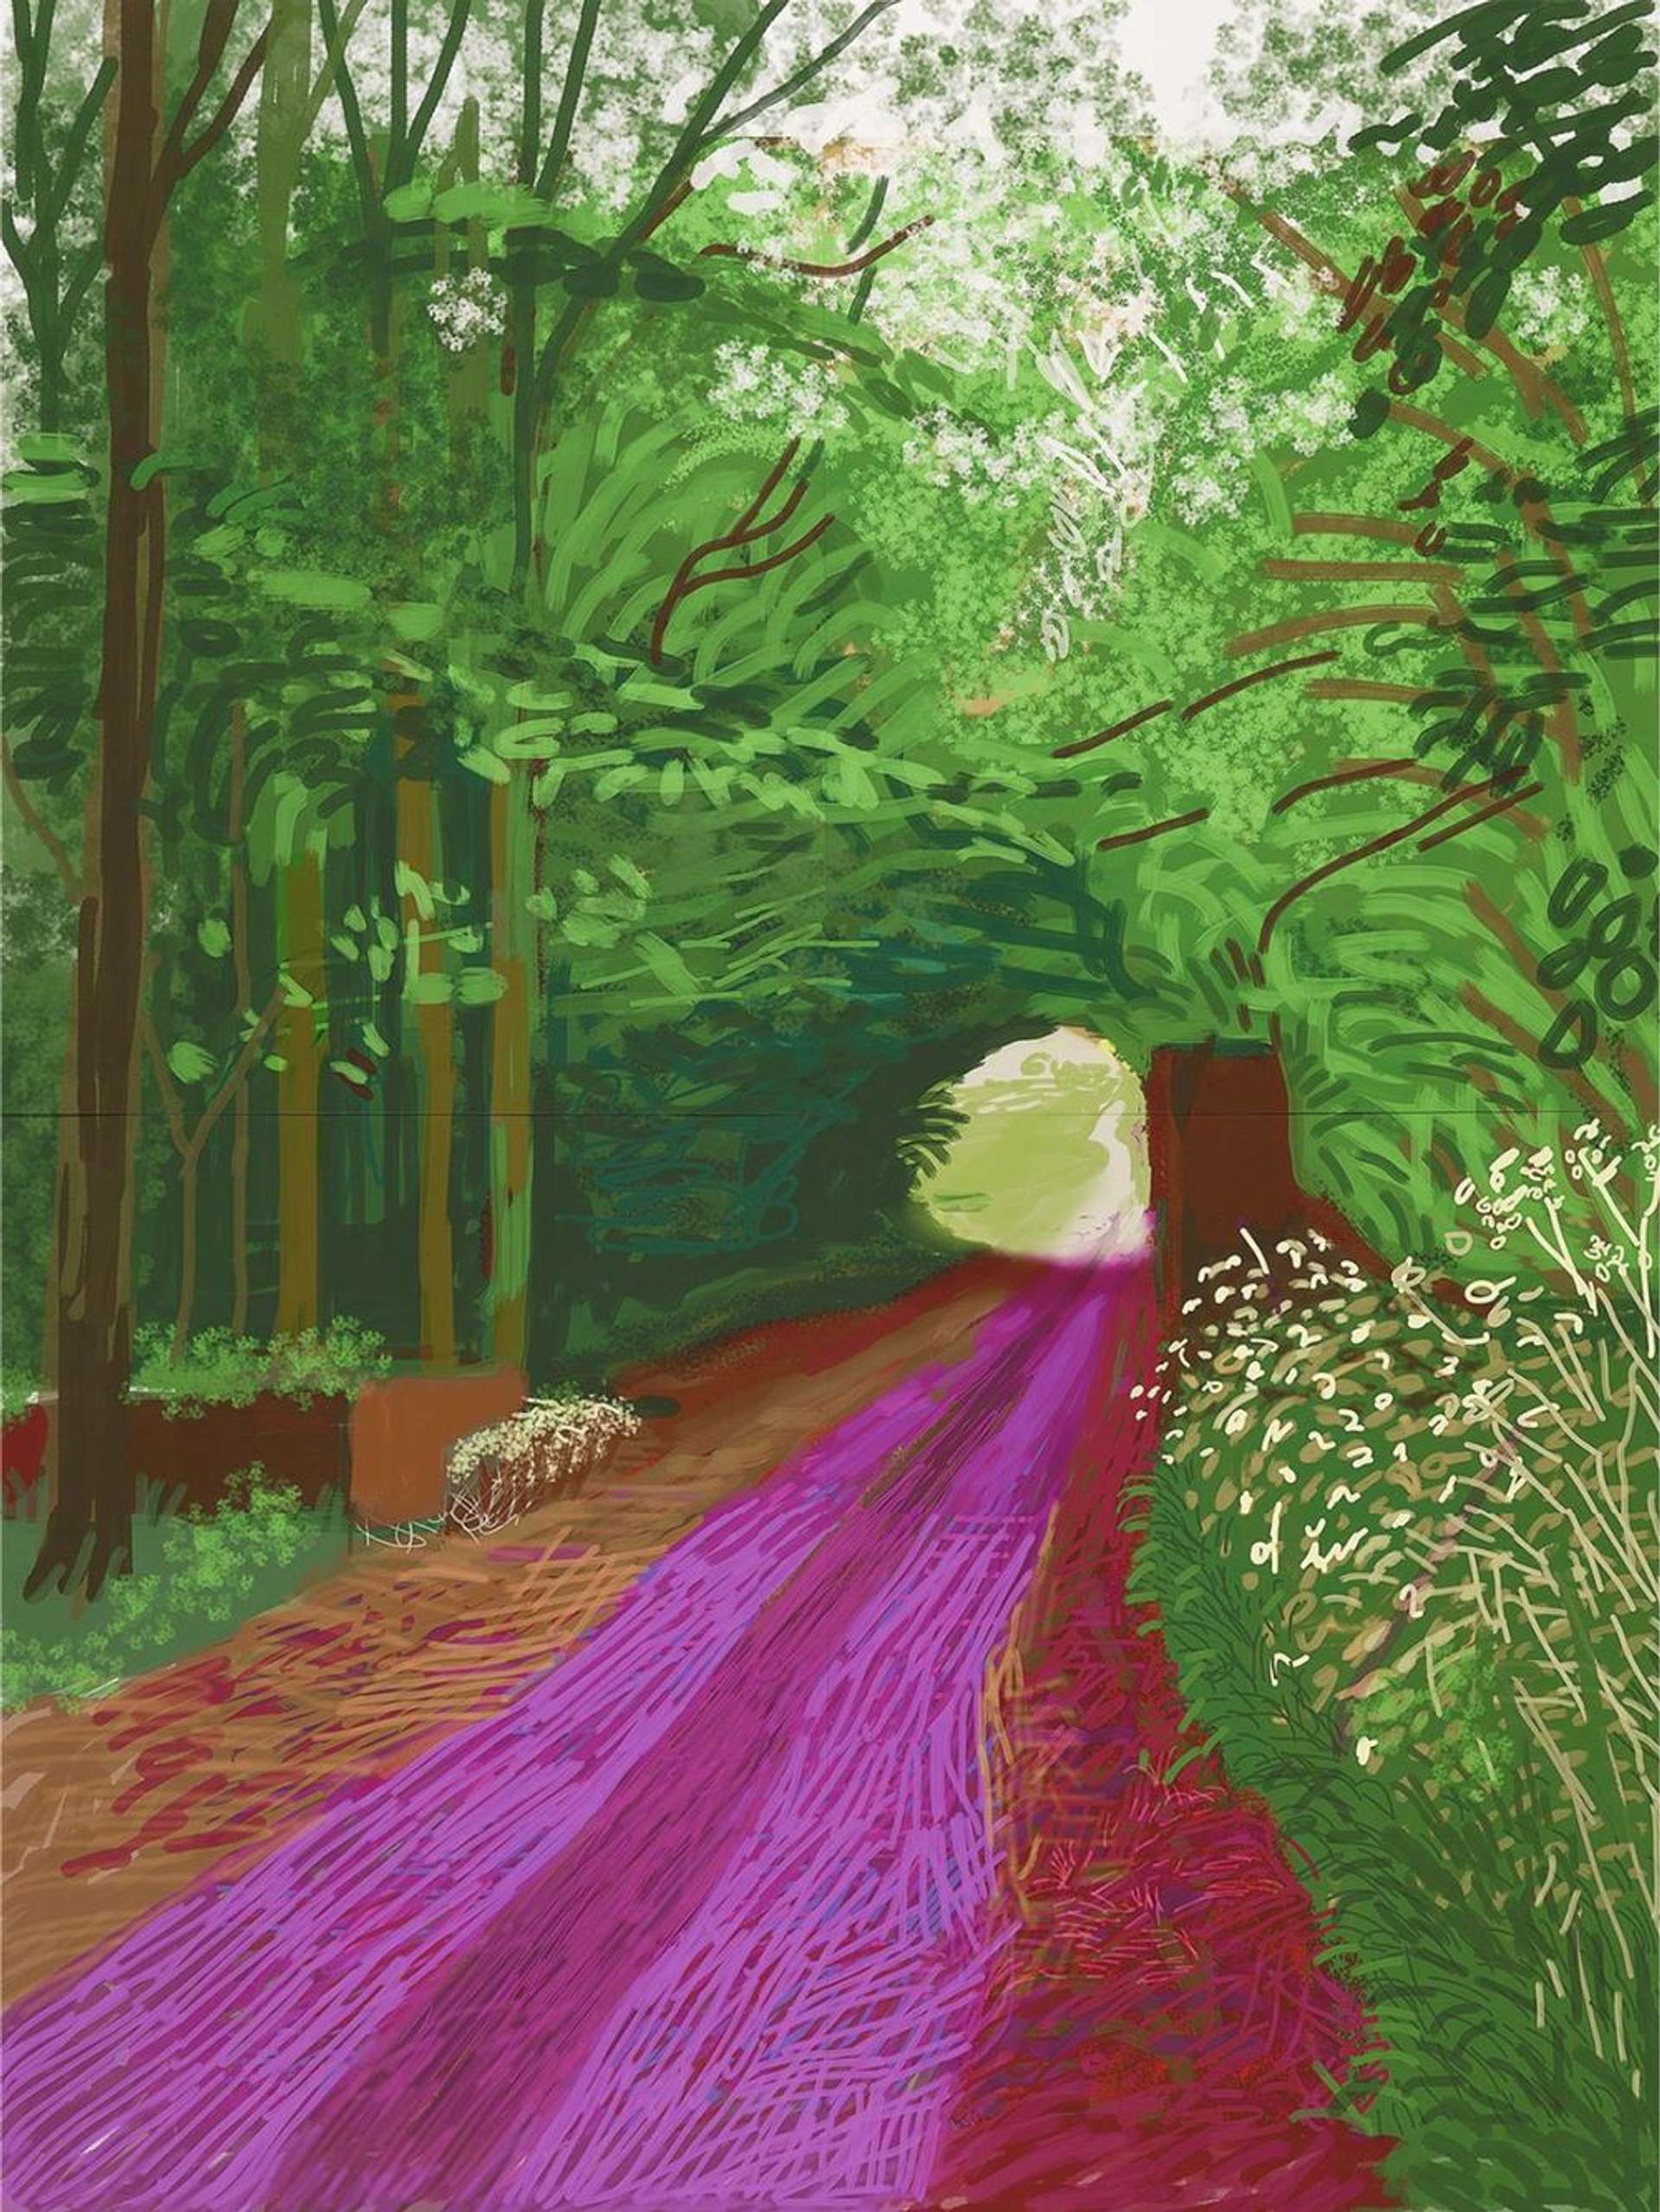 The Arrival Of Spring In Woldgate East Yorkshire 31st May 2011 - No. 1 - Signed Print by David Hockney 2011 - MyArtBroker